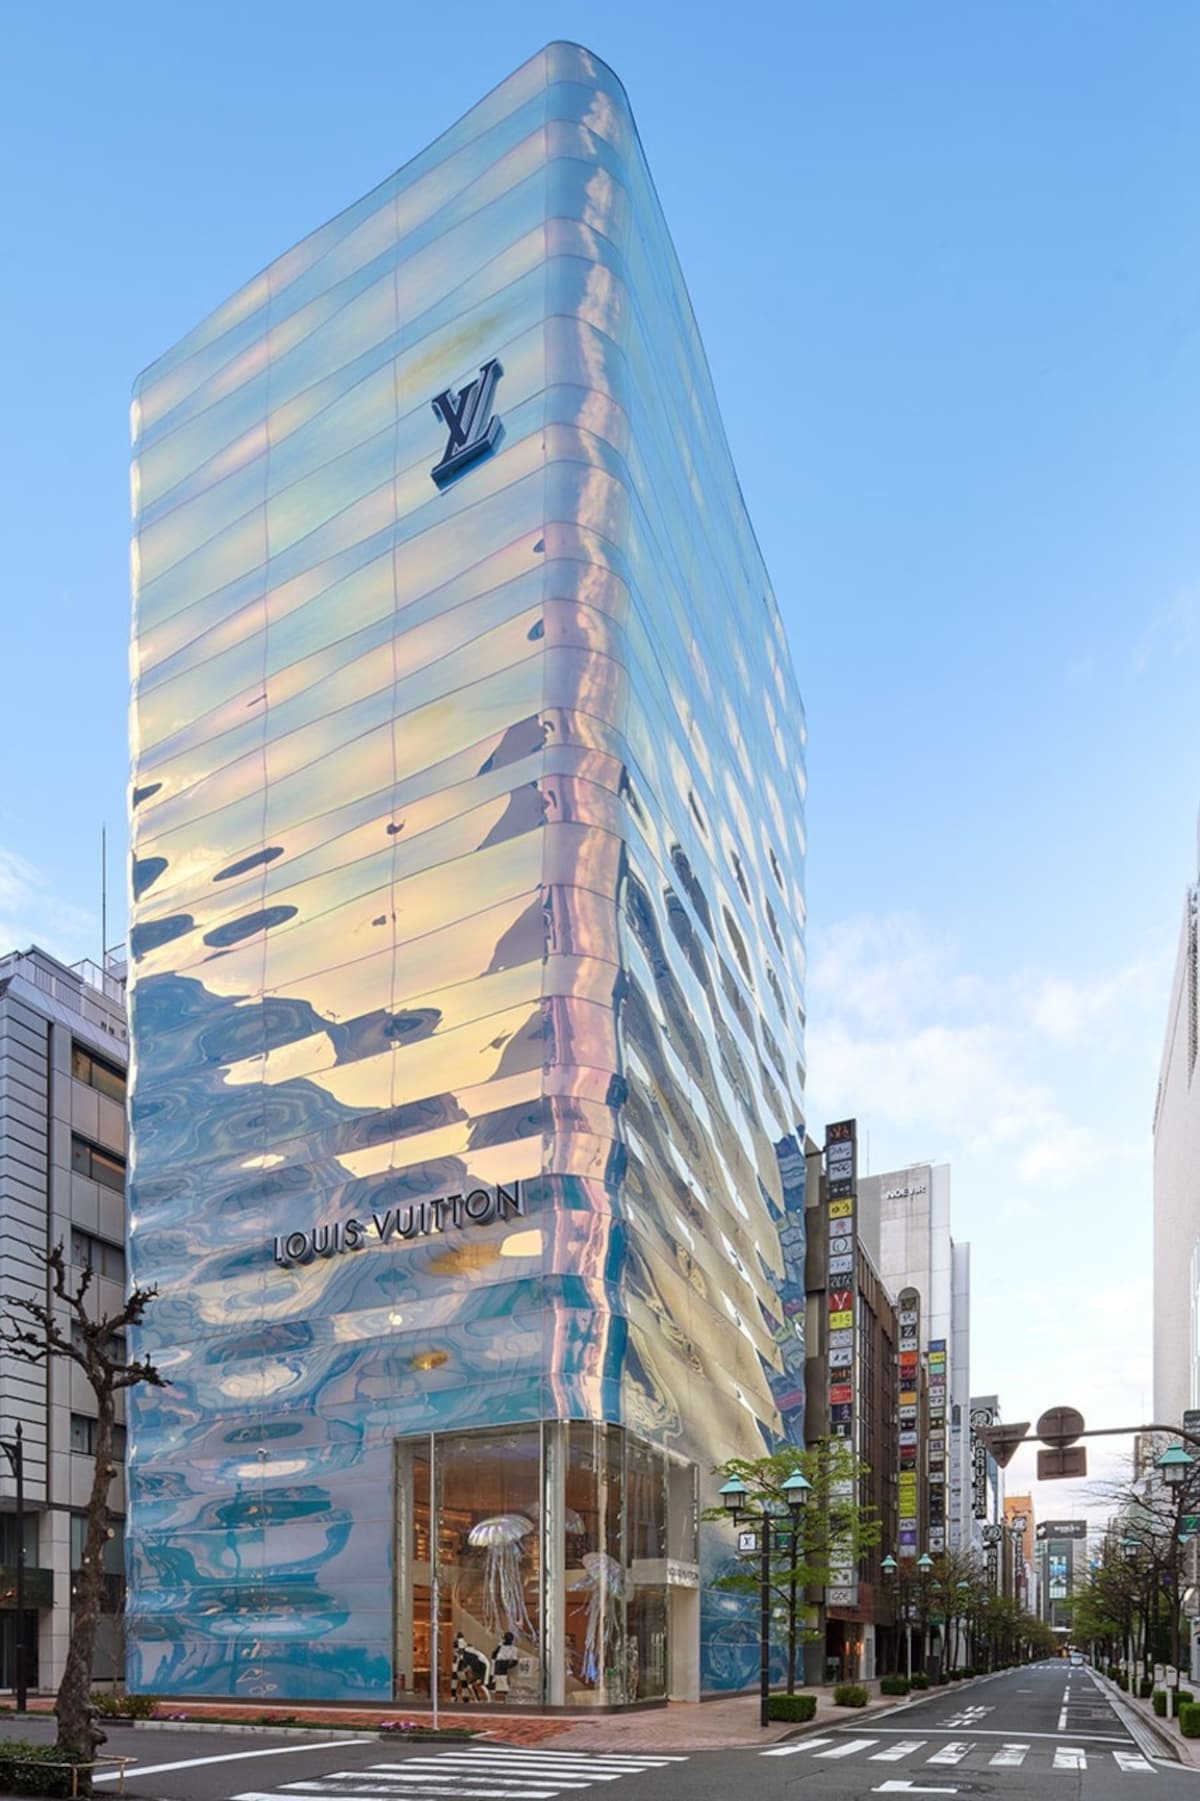 Louis Vuitton's Water Design Shimmers in Ginza